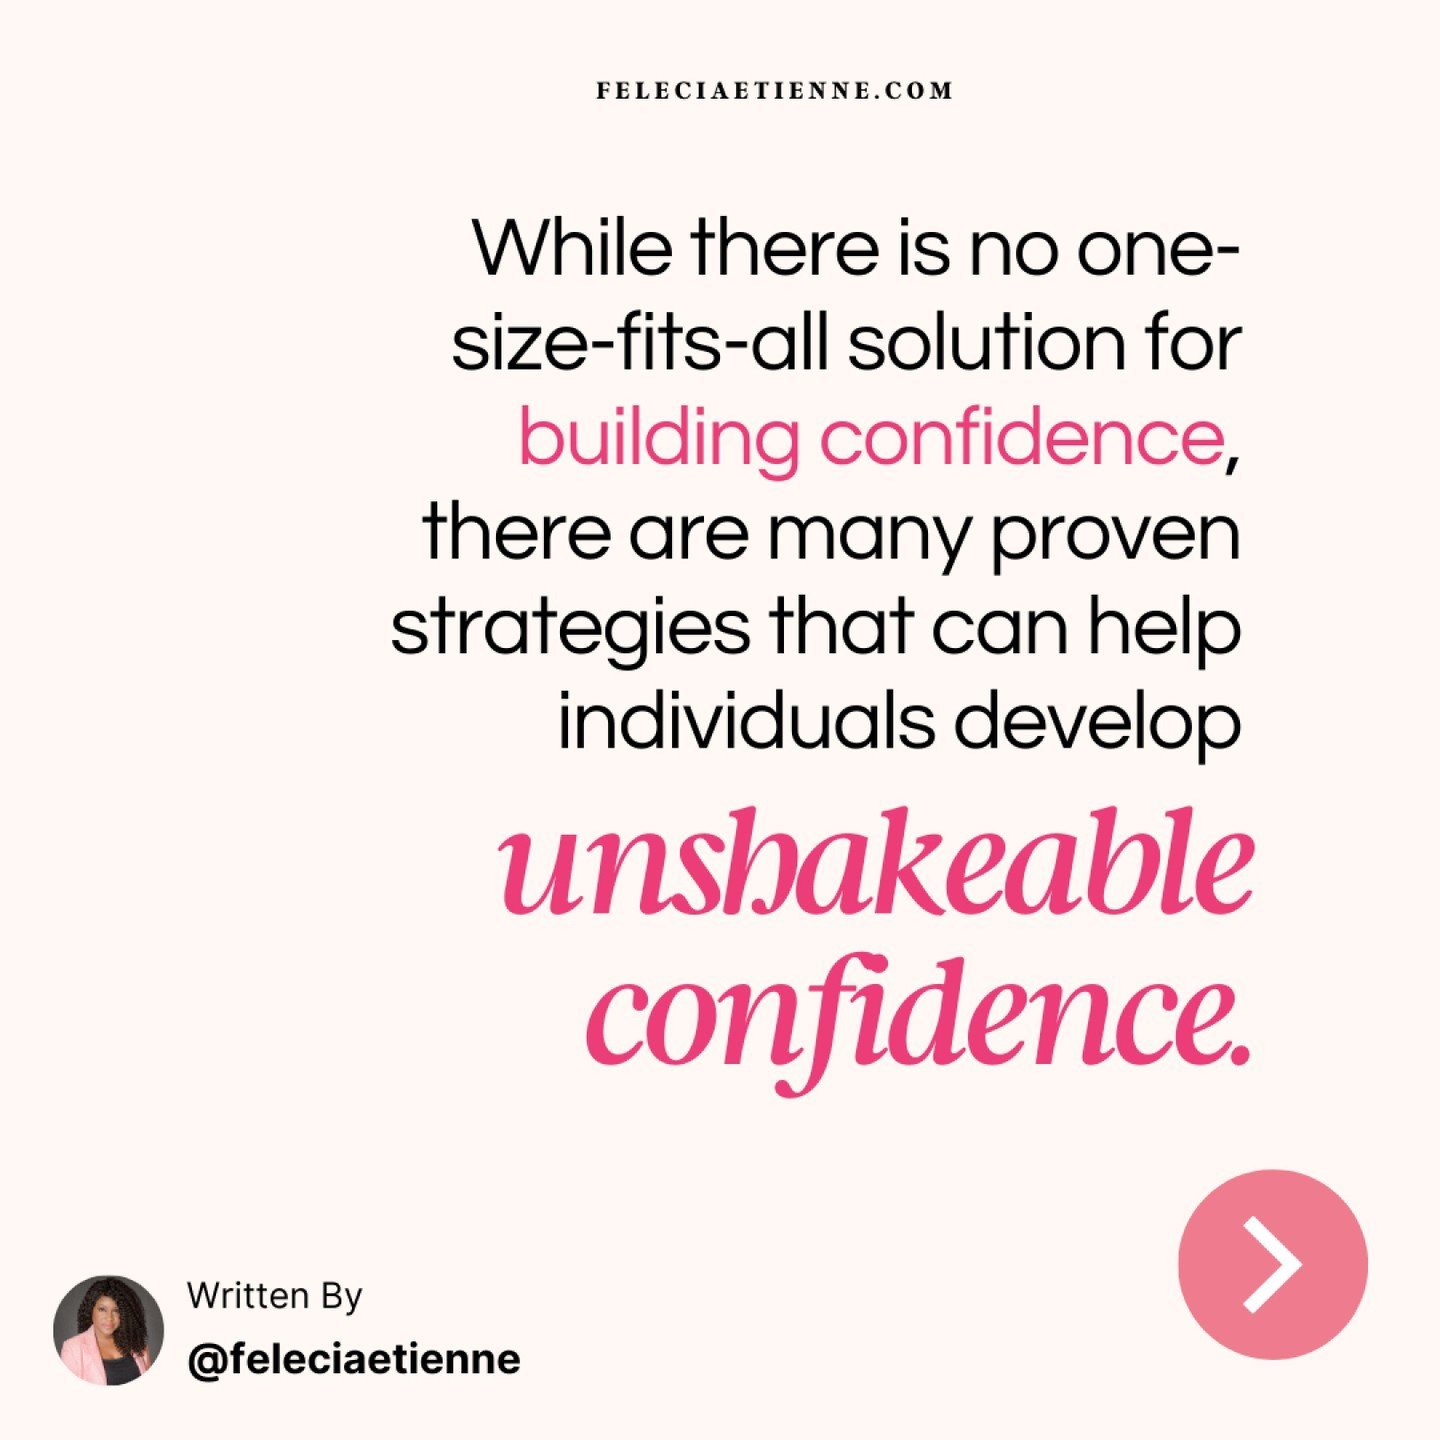 🌟 Want to build unshakable confidence? Swipe through to discover how! 🌟

📌 Your thoughts and beliefs shape how confident you feel. Cultivate positive self-talk.

📌 Embrace your true self. Let your authenticity shine without worrying about societa